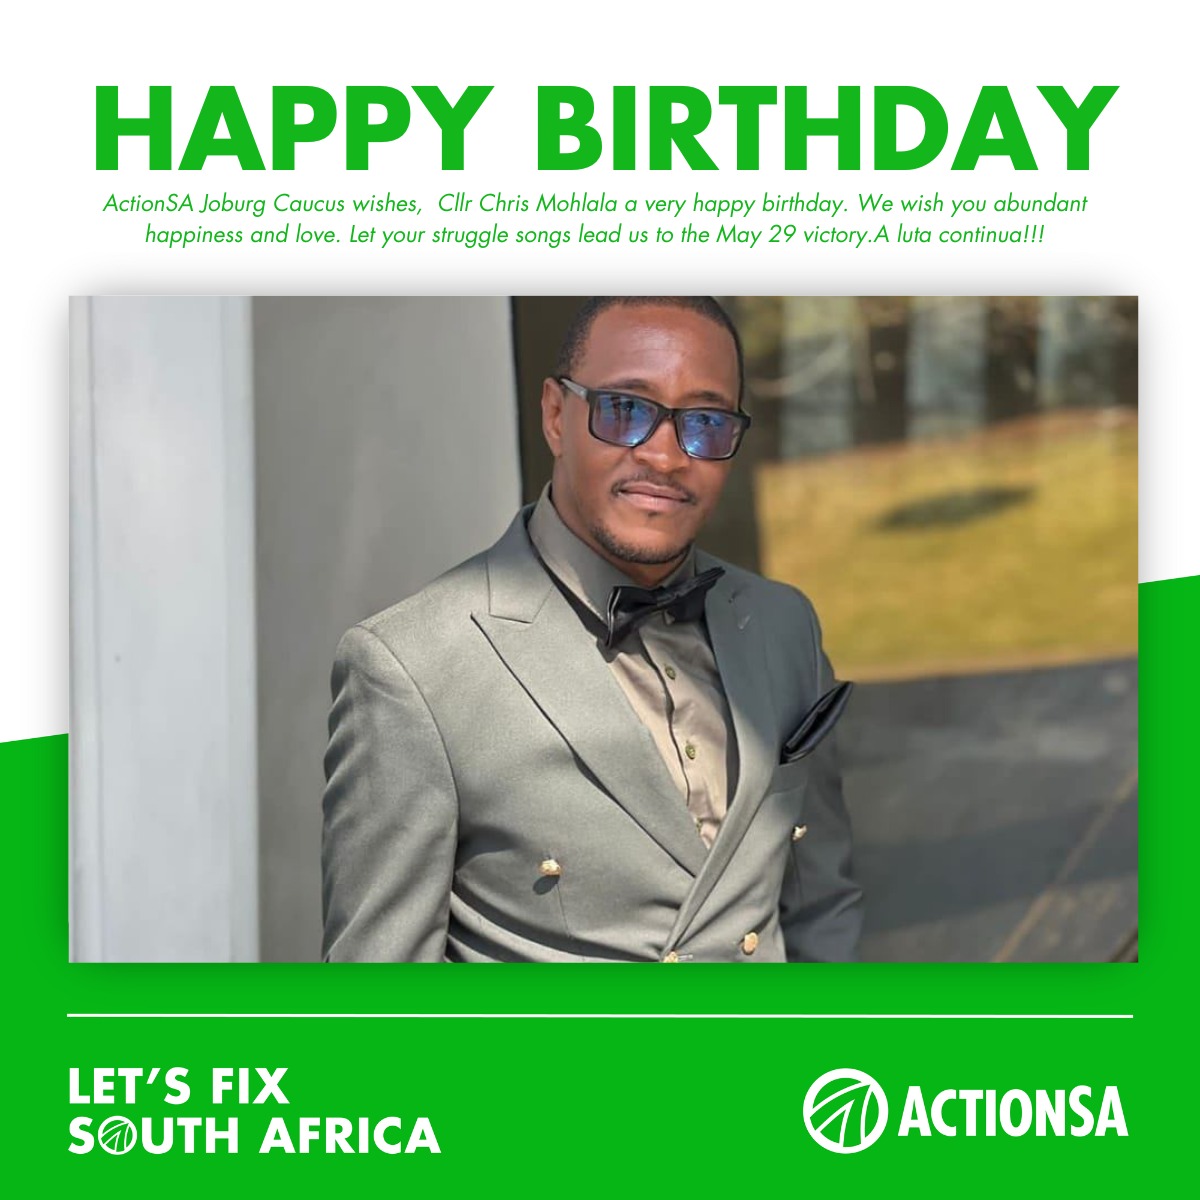 @ActionSA_JHB Caucus wishes, Cllr Chris Mohlala a very happy birthday. Let your struggle songs lead us to the May 29 victory. Aluta Continua!!!